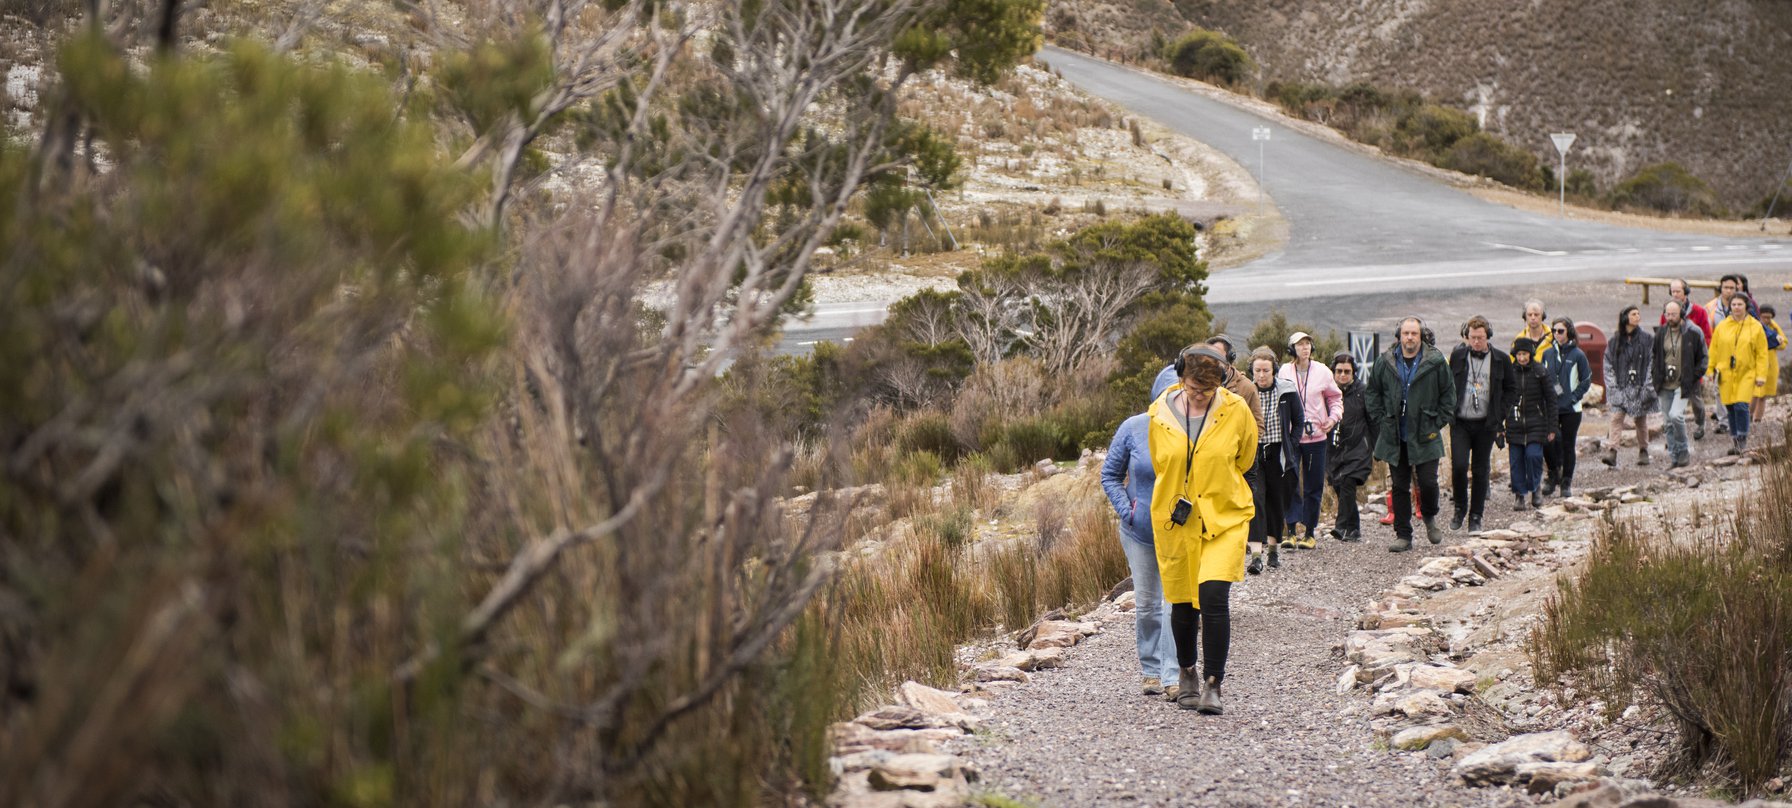 A photo of people walking along a gravel path towards the camera, following a person wearing a vibrant yellow coat. Image by Jack Robert-Tissot.